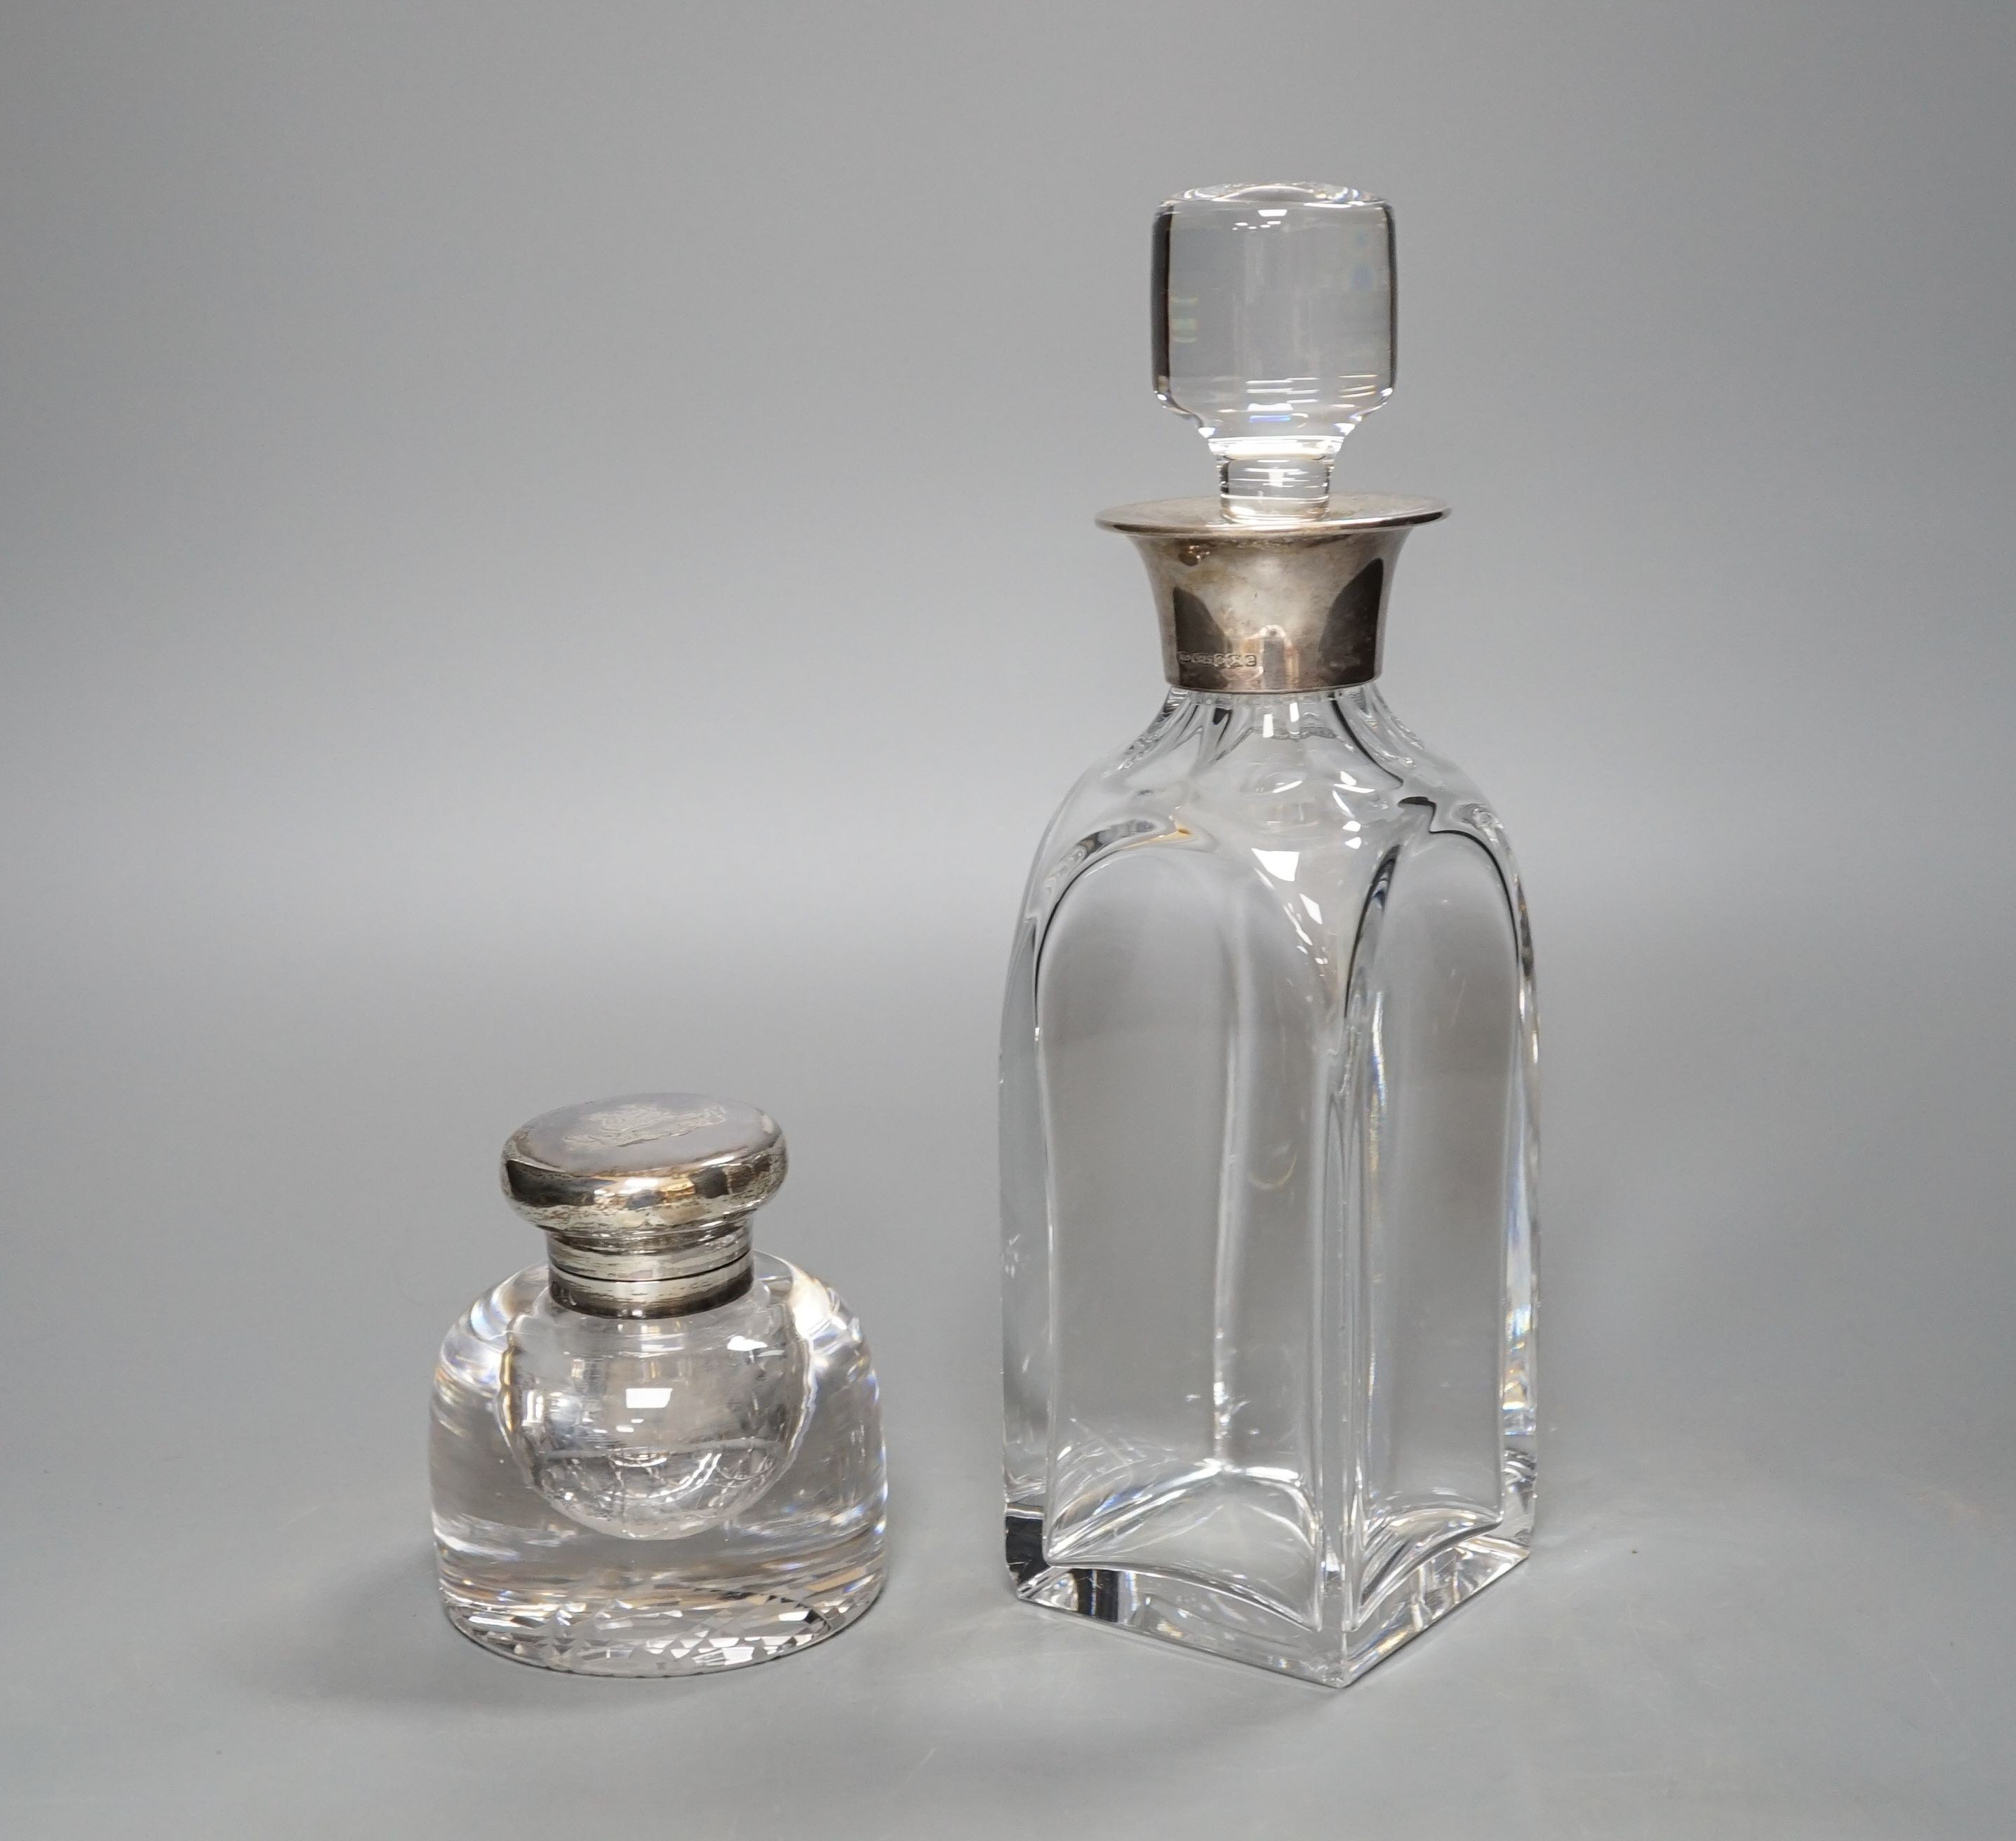 A Victorian circular heavy glass inkwell with hinged silver lid, engraved crest (London 1892) and a silver mounted decanter, 26.5cm